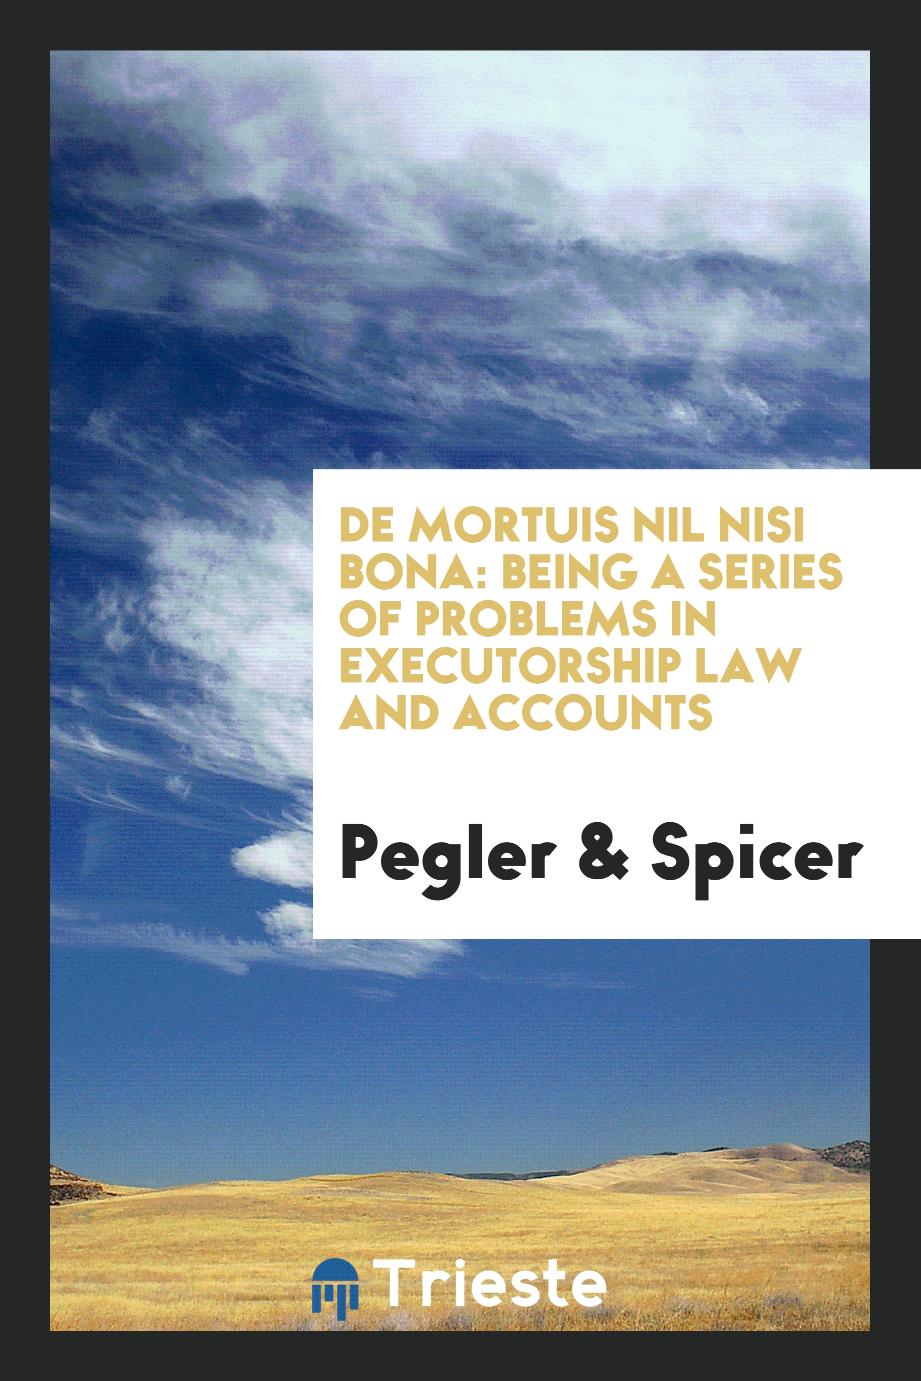 De Mortuis Nil Nisi Bona: Being a Series of Problems in Executorship Law and Accounts